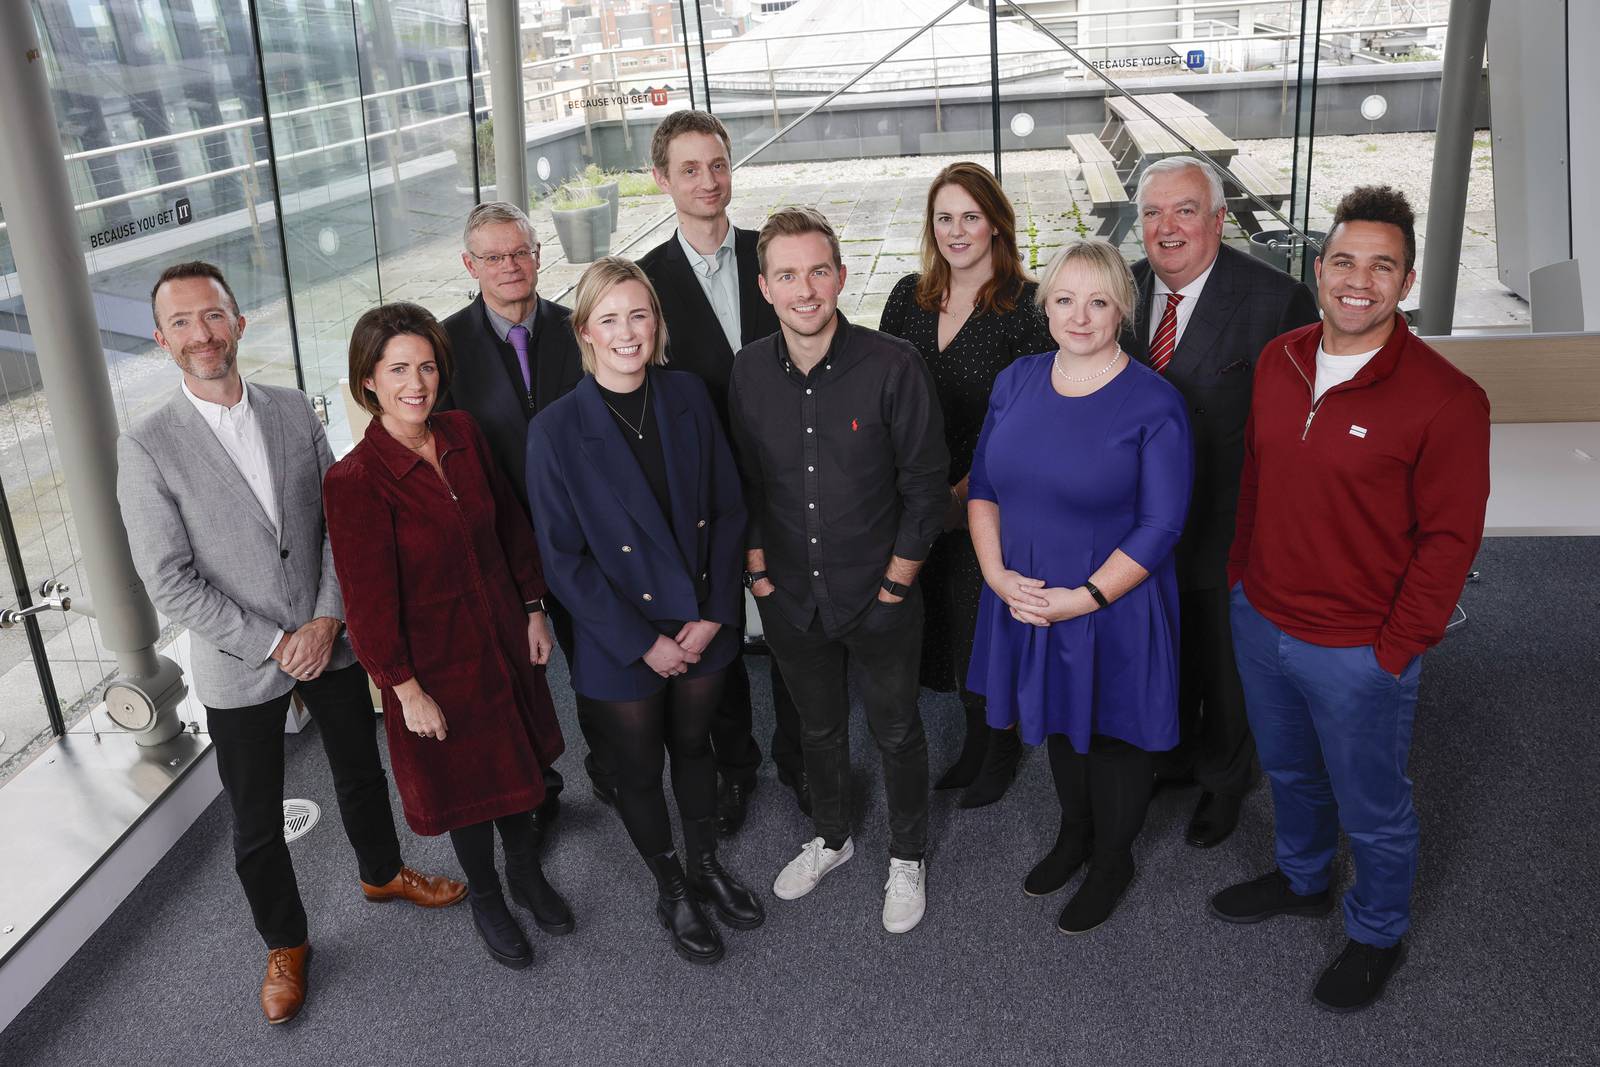 Judges for The Irish Times Innovation awards 2023 were (left to right): Eoin McDonnell, Ciara O’Reilly, Chris Horn, Grainne Mullins, Peter Clifford, Conor O’Boyle, Sarah Cloonan, Sarah Healy, Patrick Gibbons, and Conor Buckley. Photograph: Conor McCabe